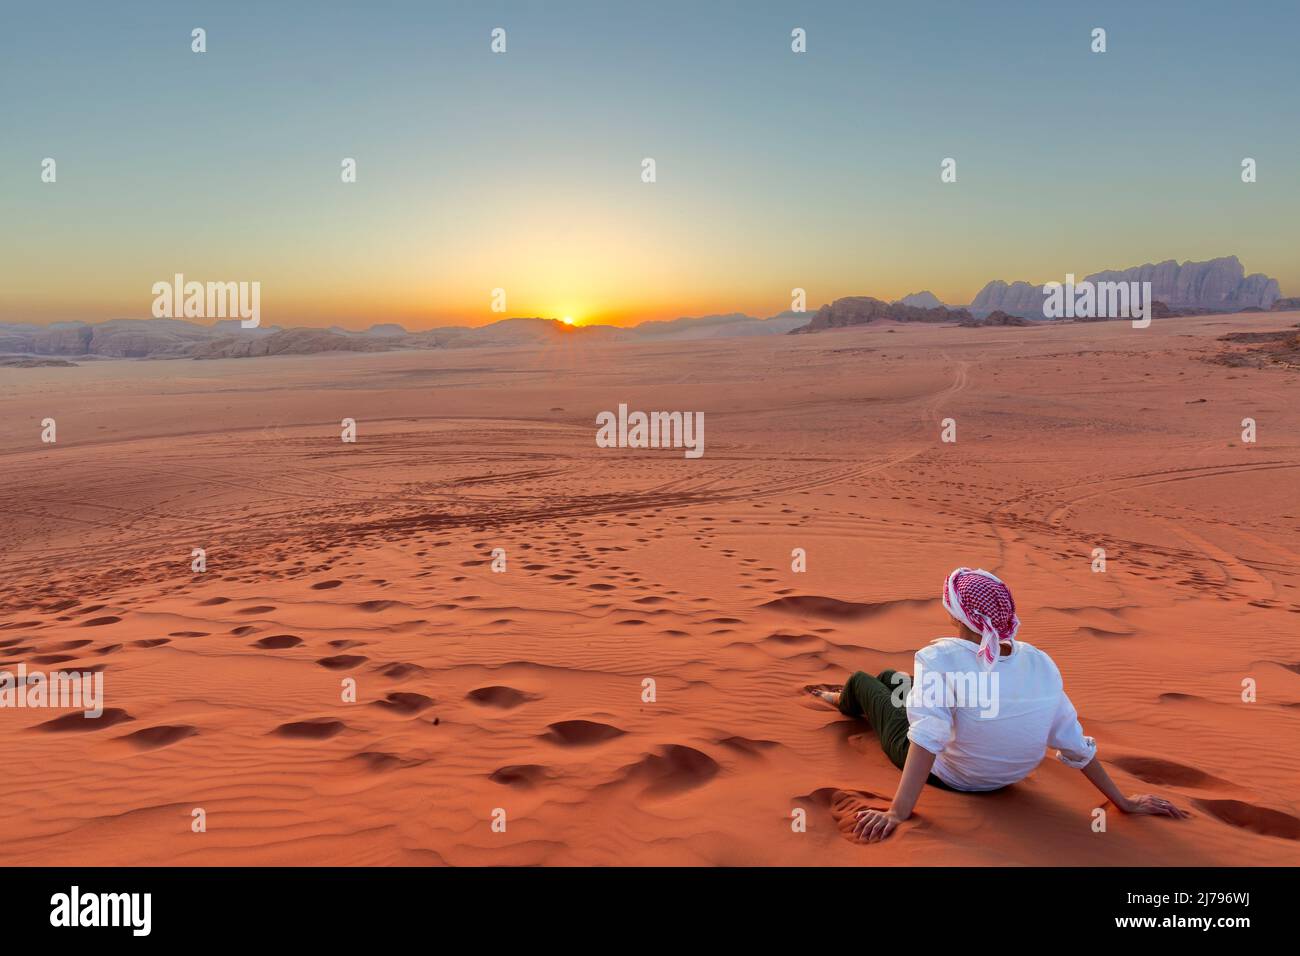 Woman enjoying the beautiful sunset in the Wadi Rum desert in Jordan, with views of the distant mountains. Stock Photo